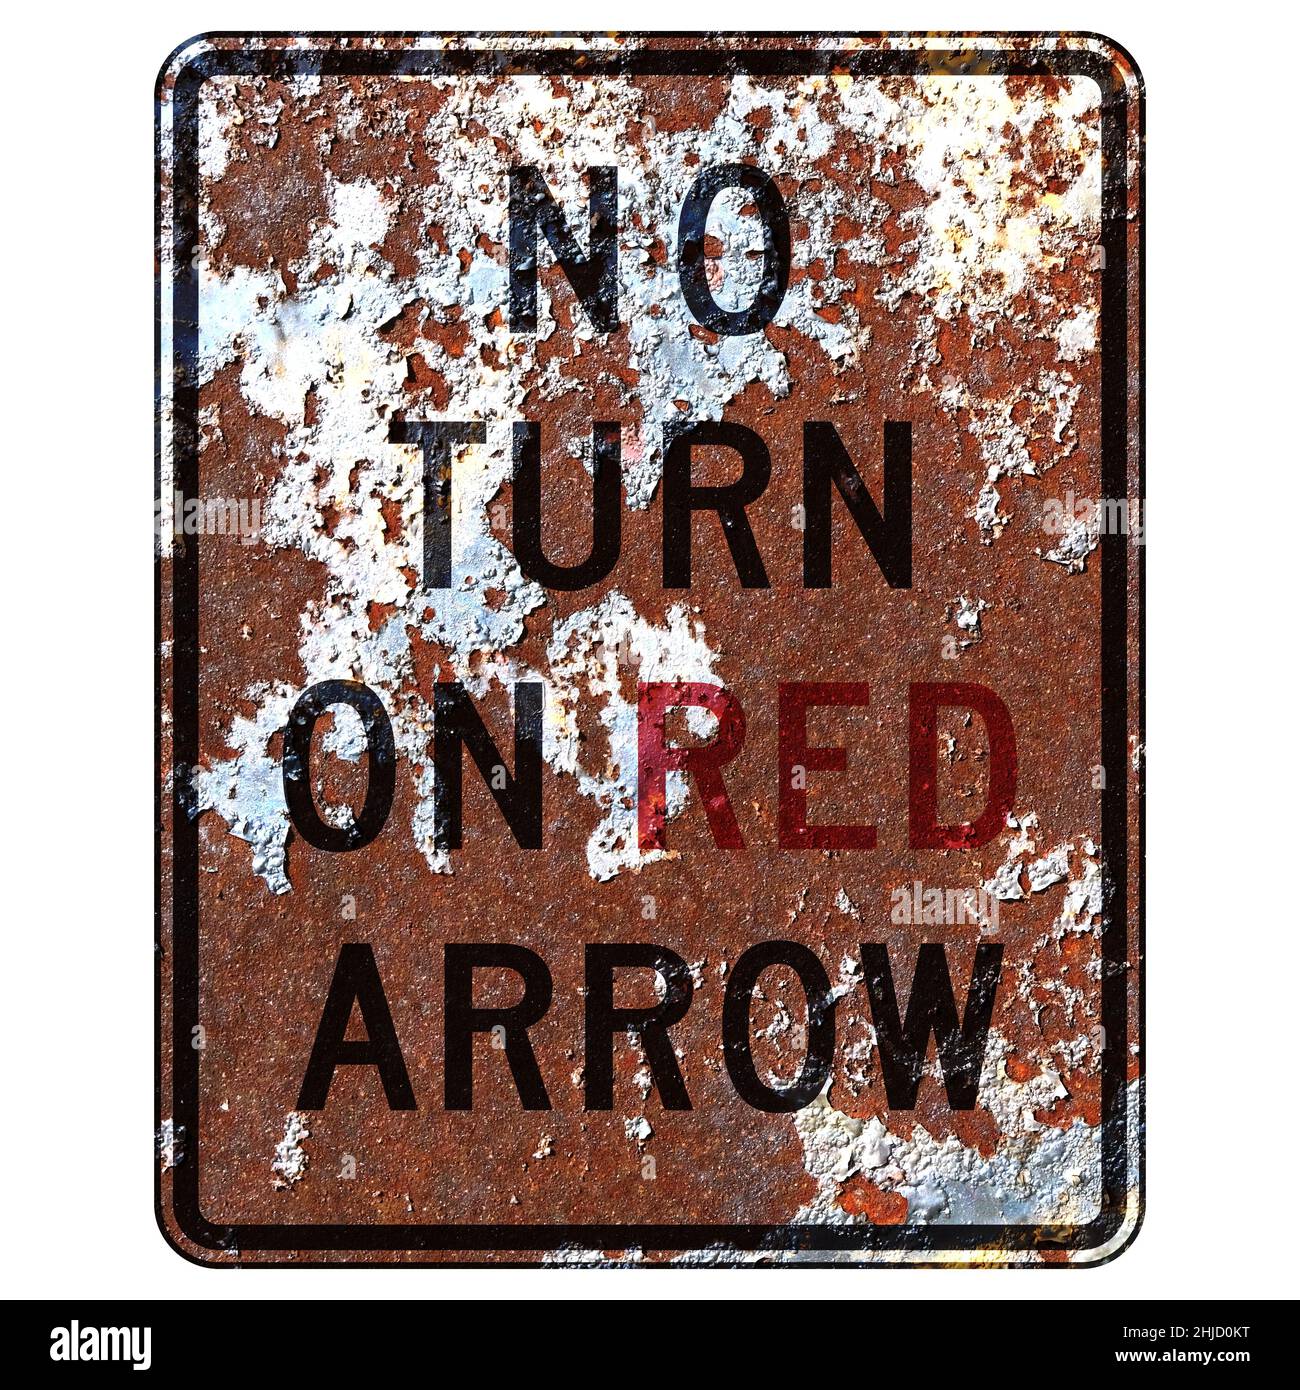 Old rusty American road sign - No turn on red arrow, Maryland Stock Photo